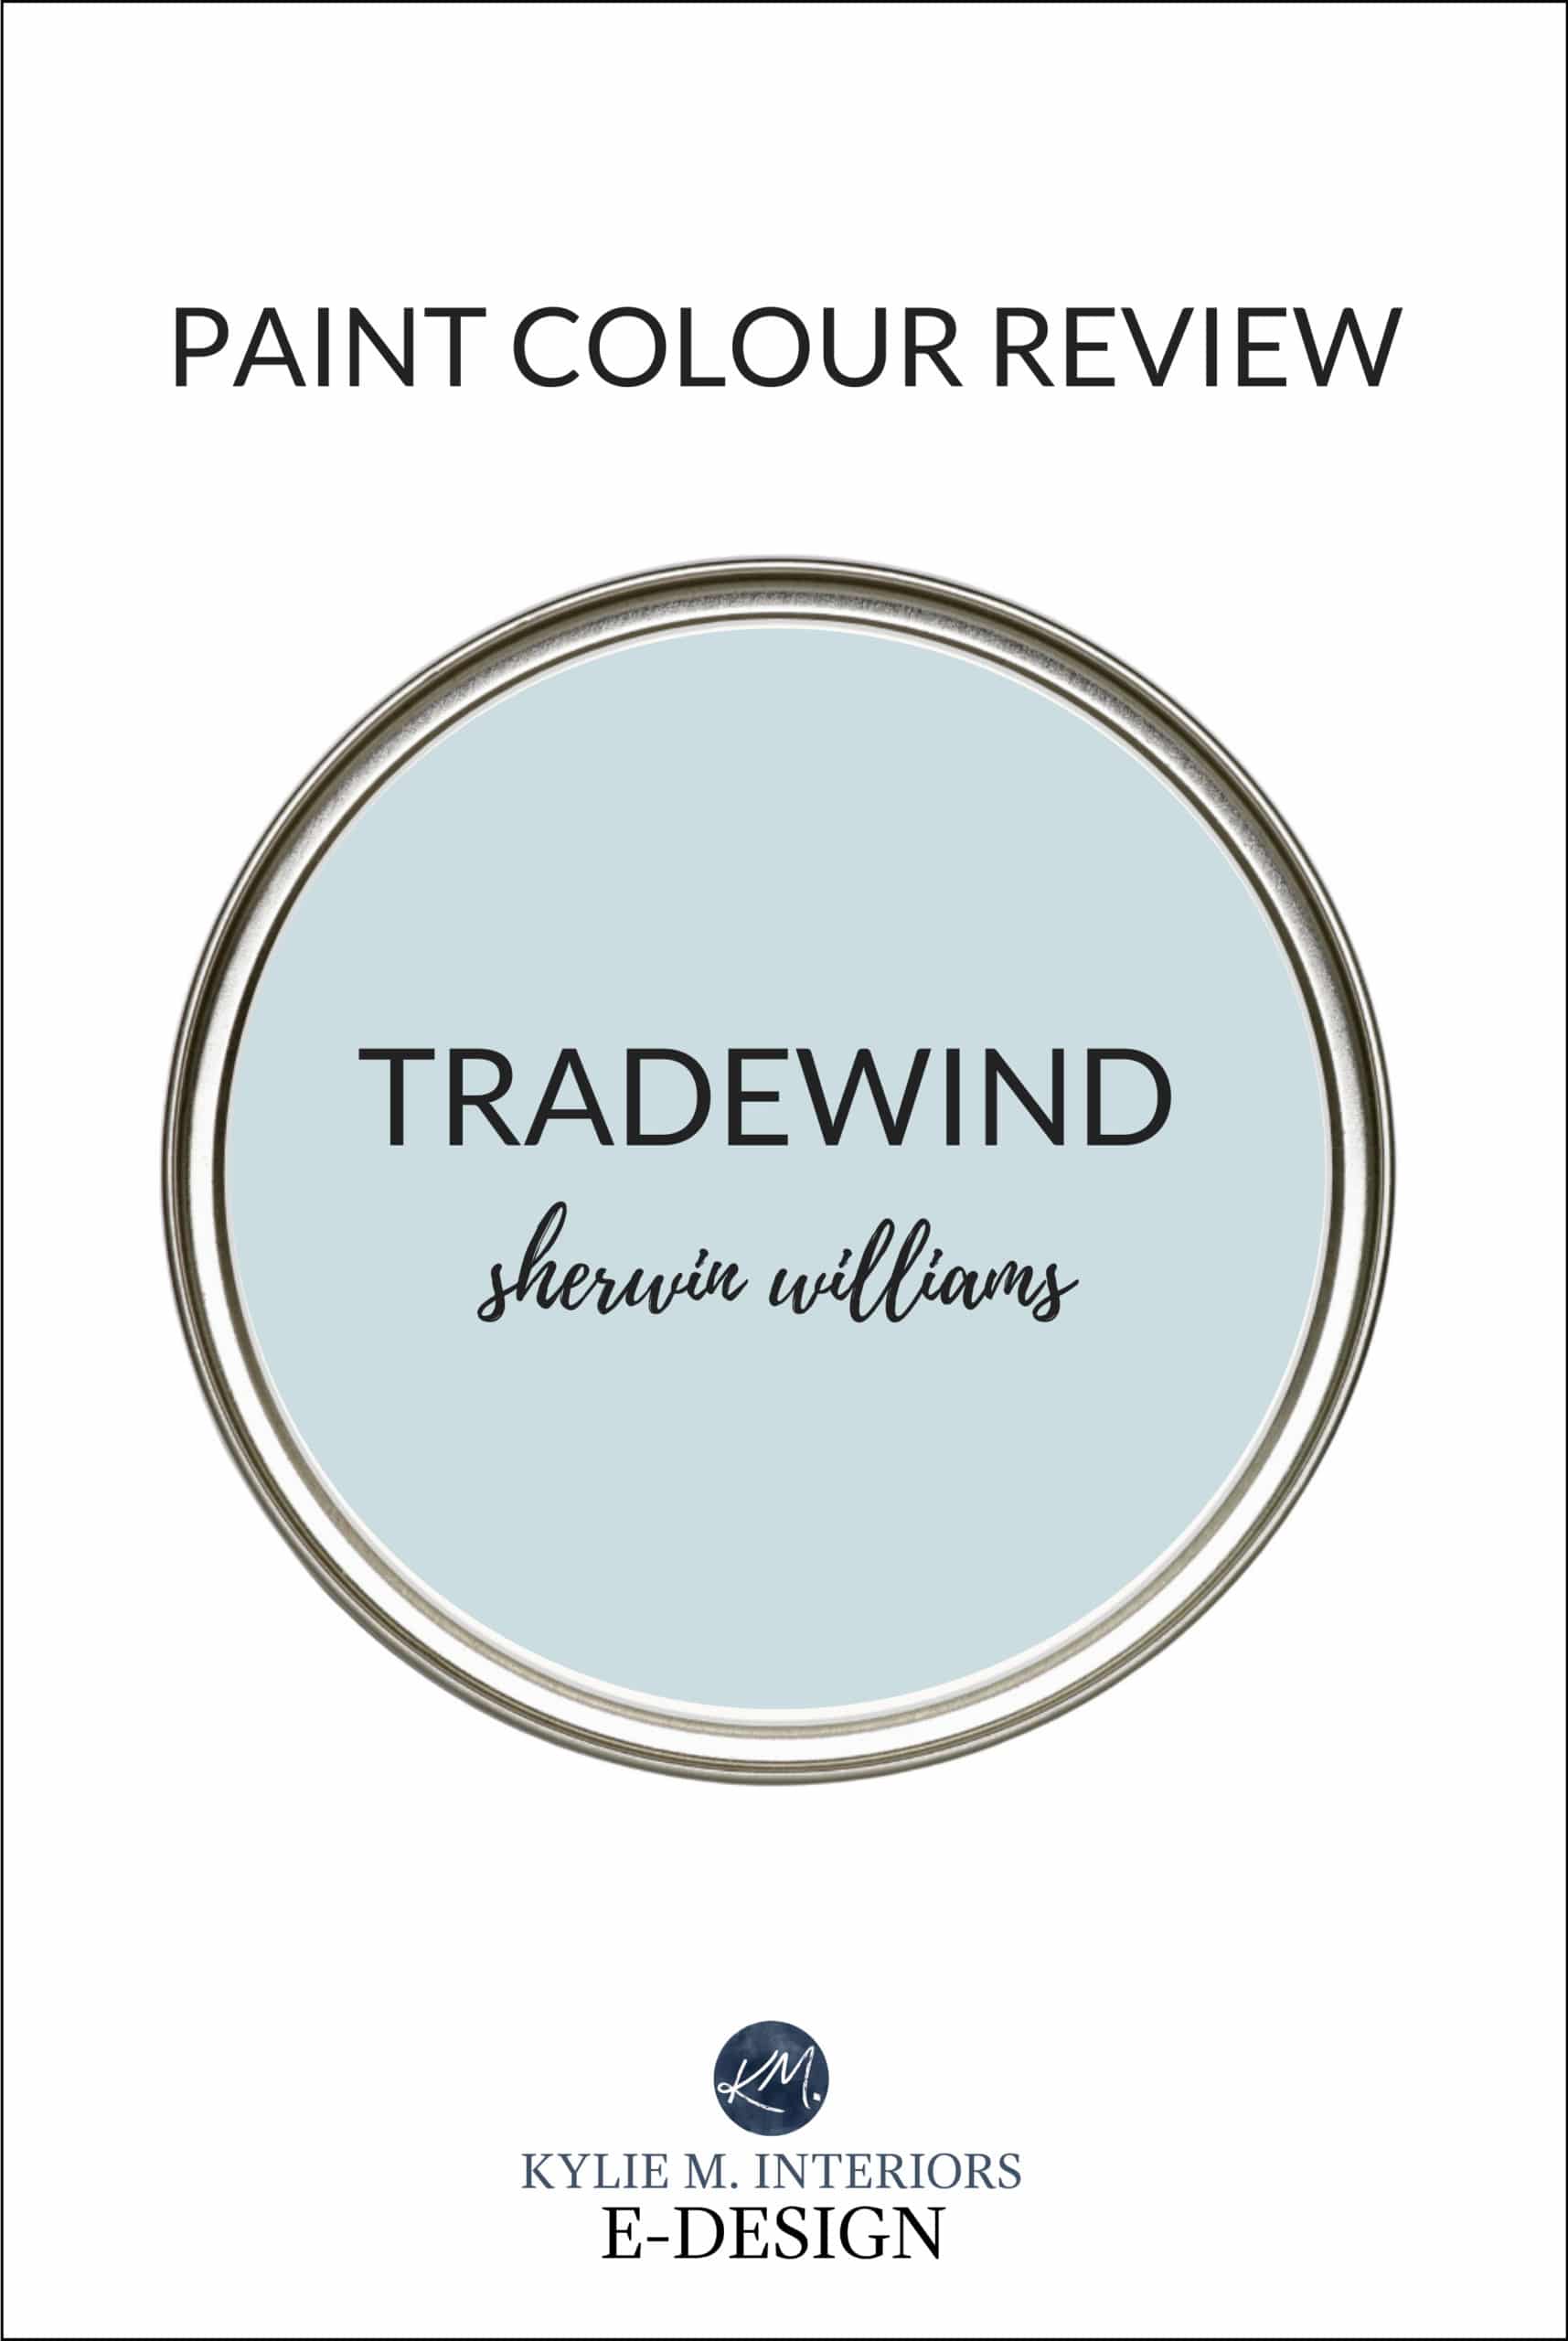 Paint colour review of the best blue paint color, Sherwin Williams Tradewind. Kylie M Interiors Edesign, online paint colour consulting and advice blog